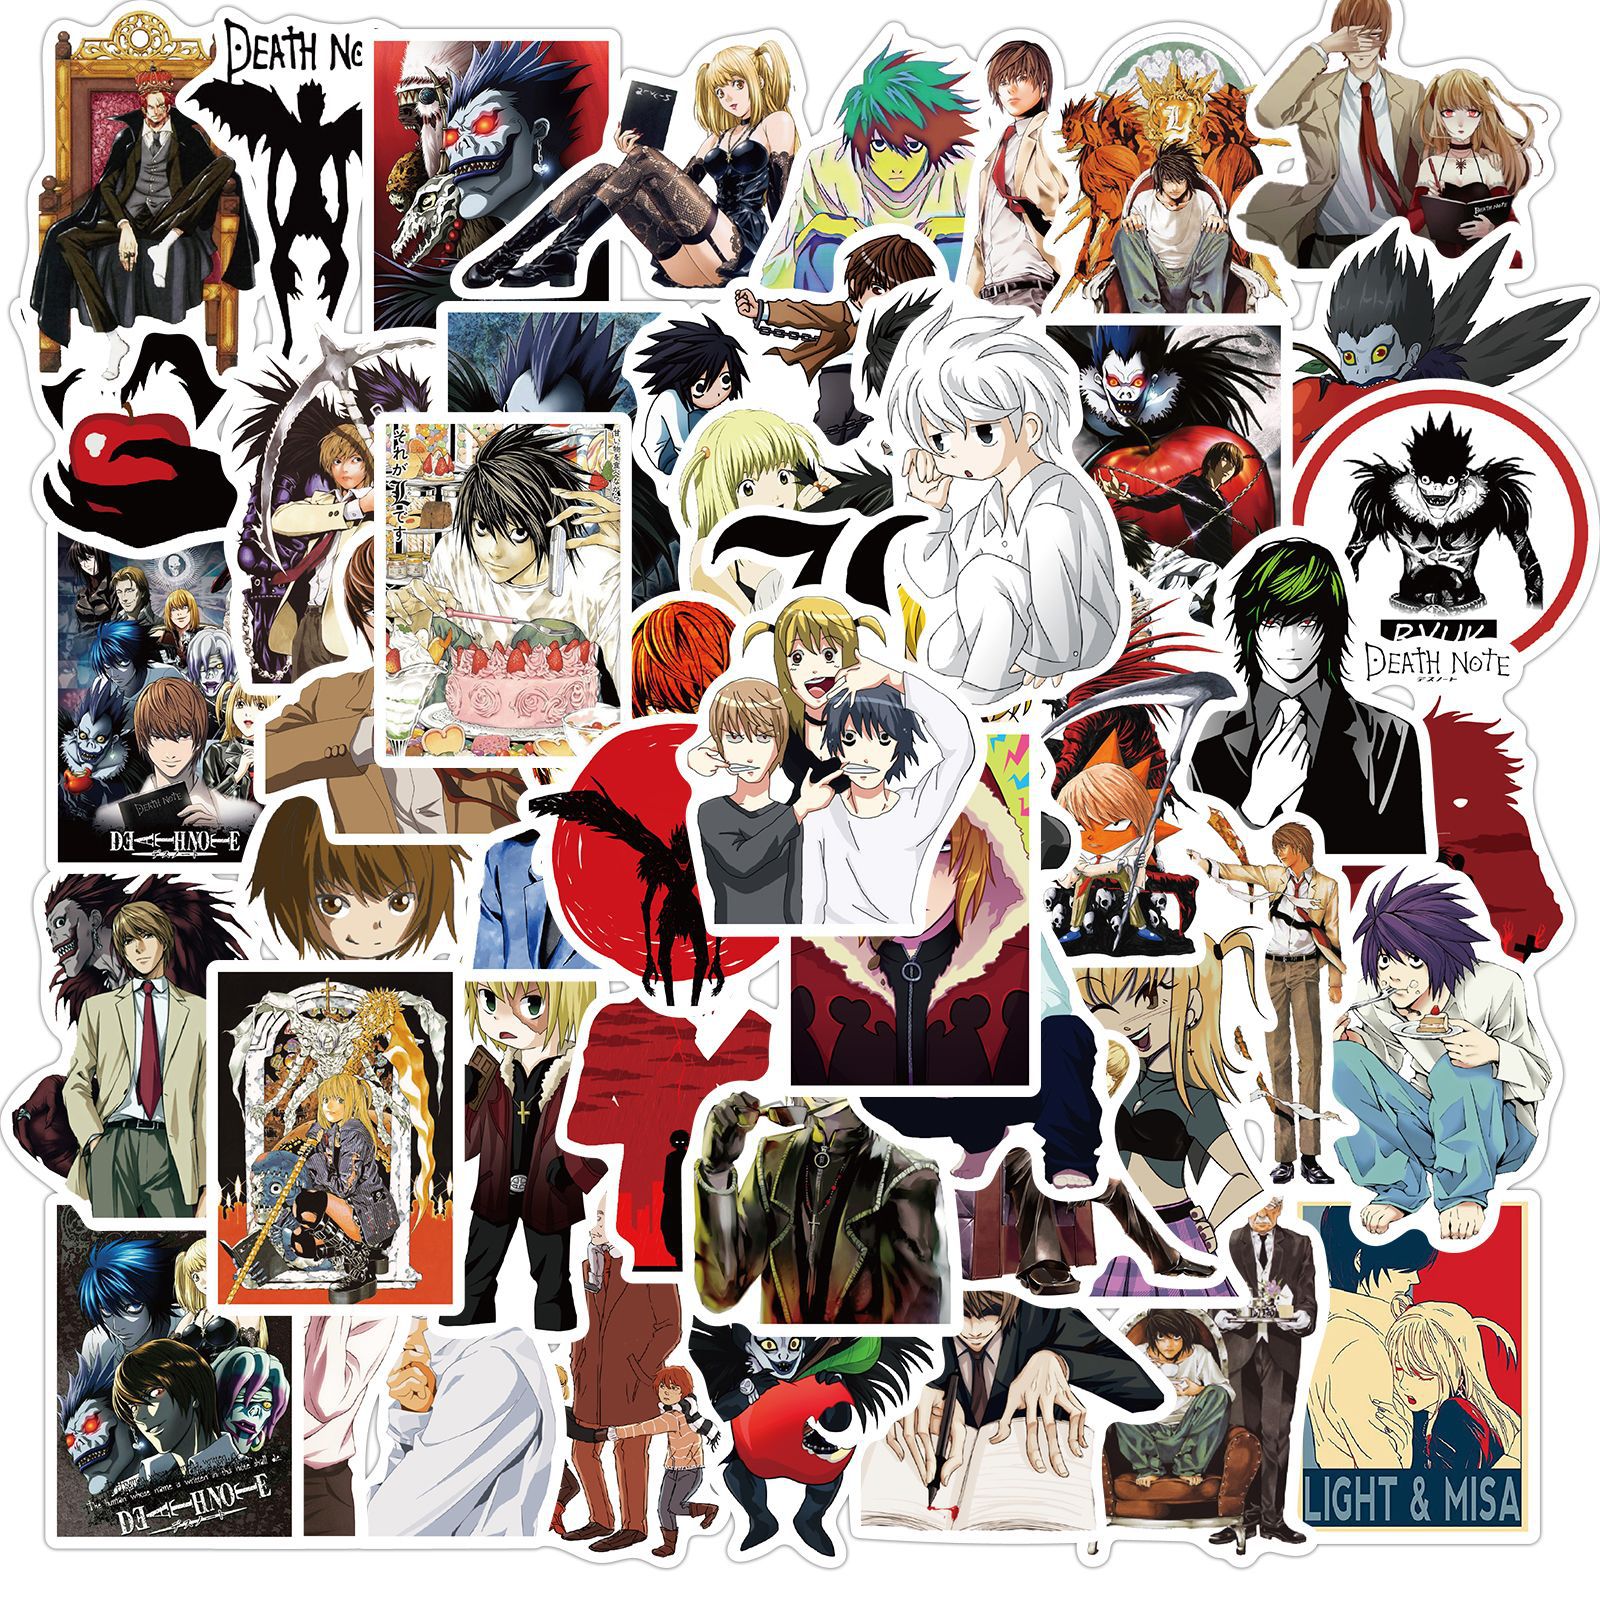 Mixed Graffiti Skateboard Stickers Black White Anime Girls For Car Laptop  Pad Bicycle Motorcycle PS4 Phone Luggage Decal Pvc Guitar Fridge From  Cindyyyyy, $3.32 | DHgate.Com